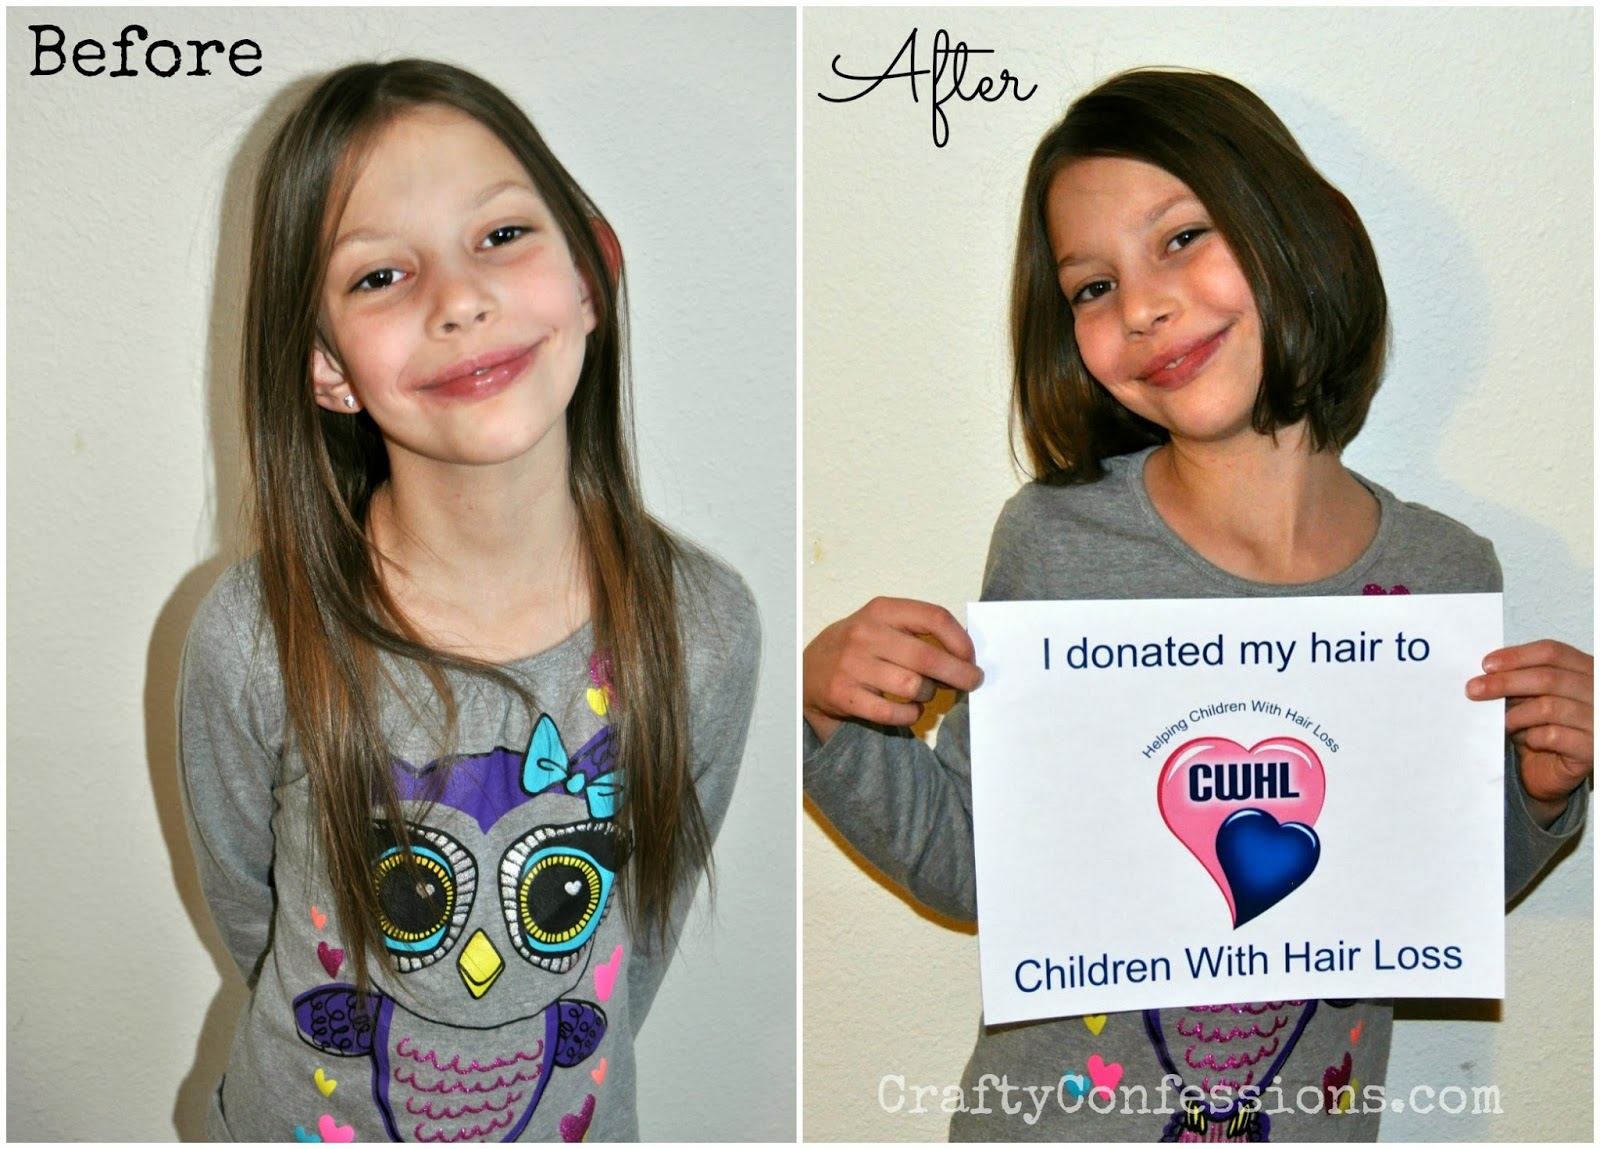 Crafty Confessions Donating Hair To Children With Hair Loss